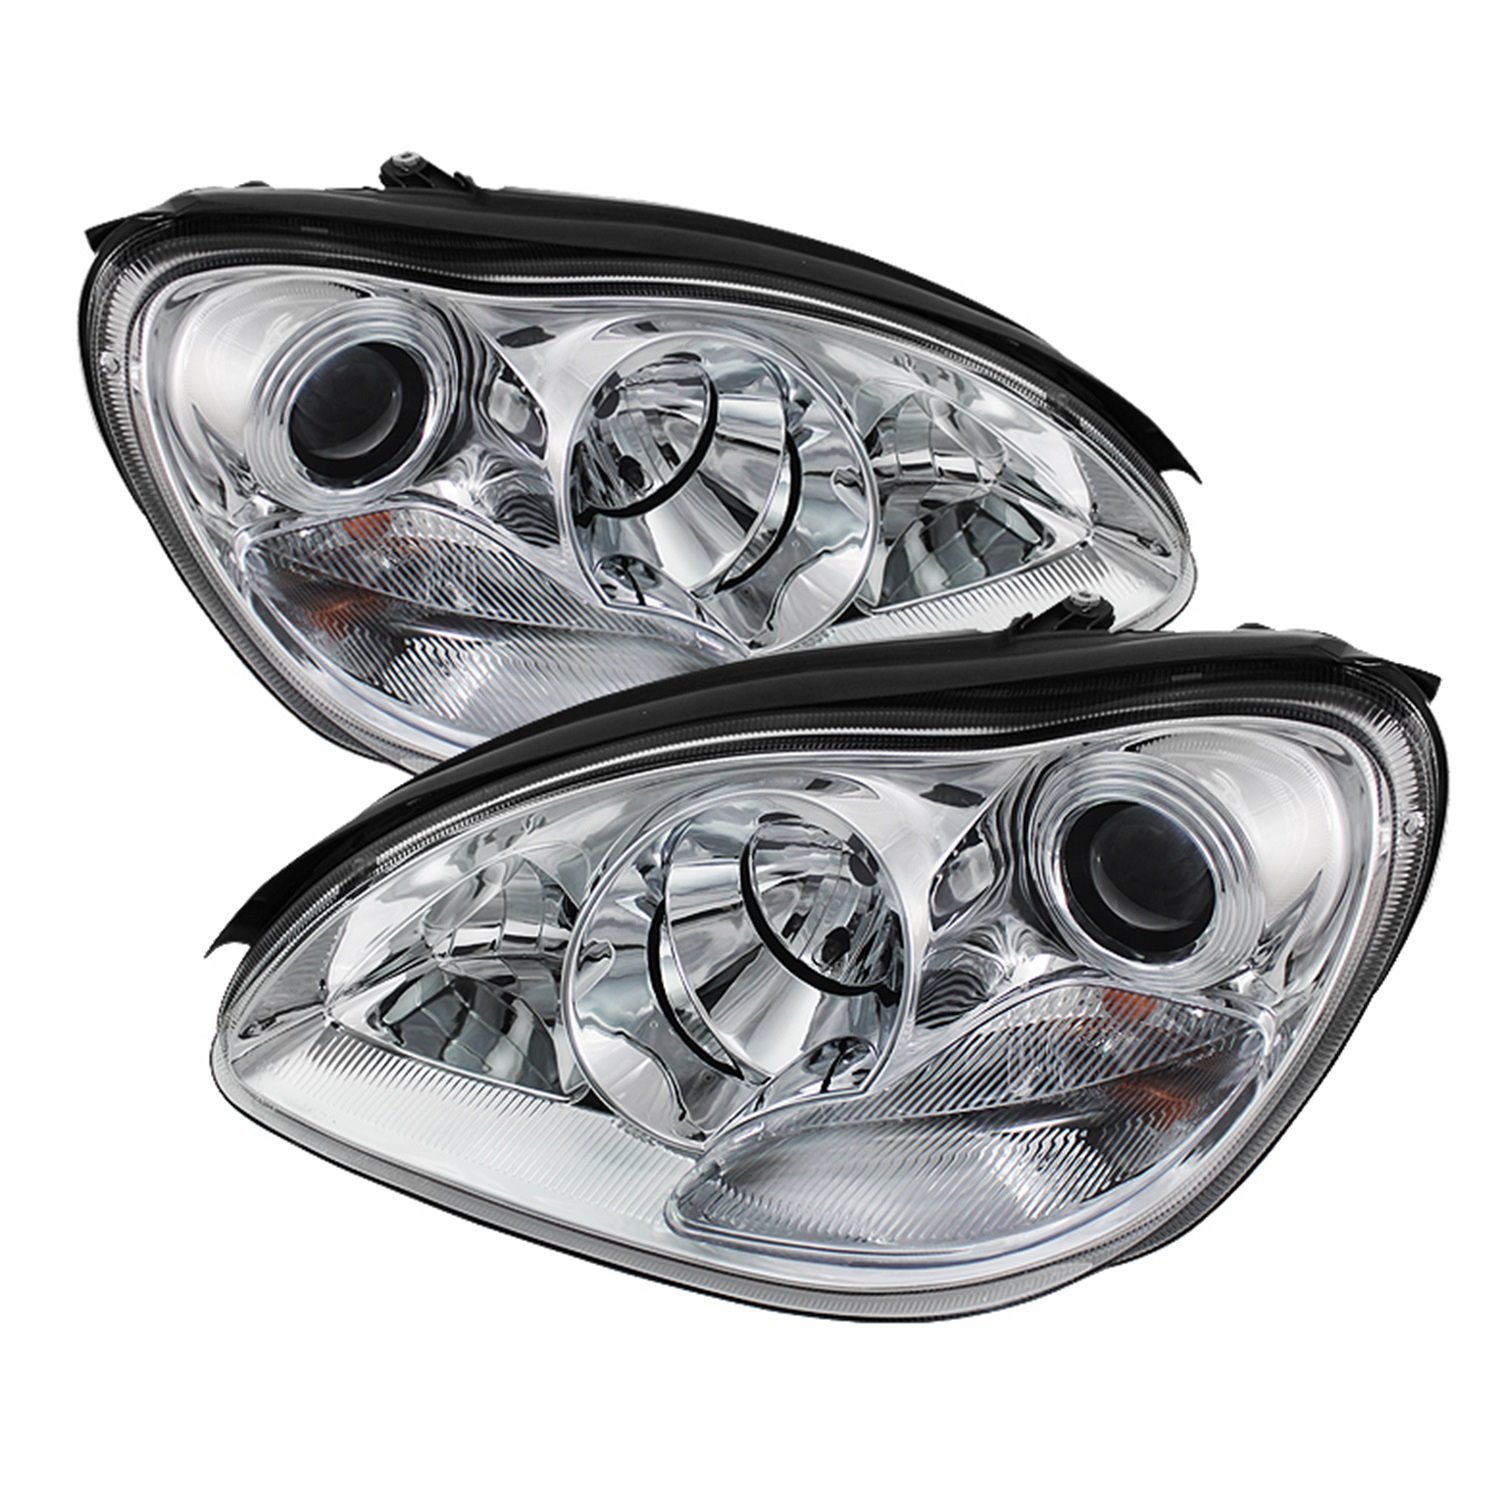 Halo LED Projector Headlights 2000-2006 Mercedes Benz S-Class